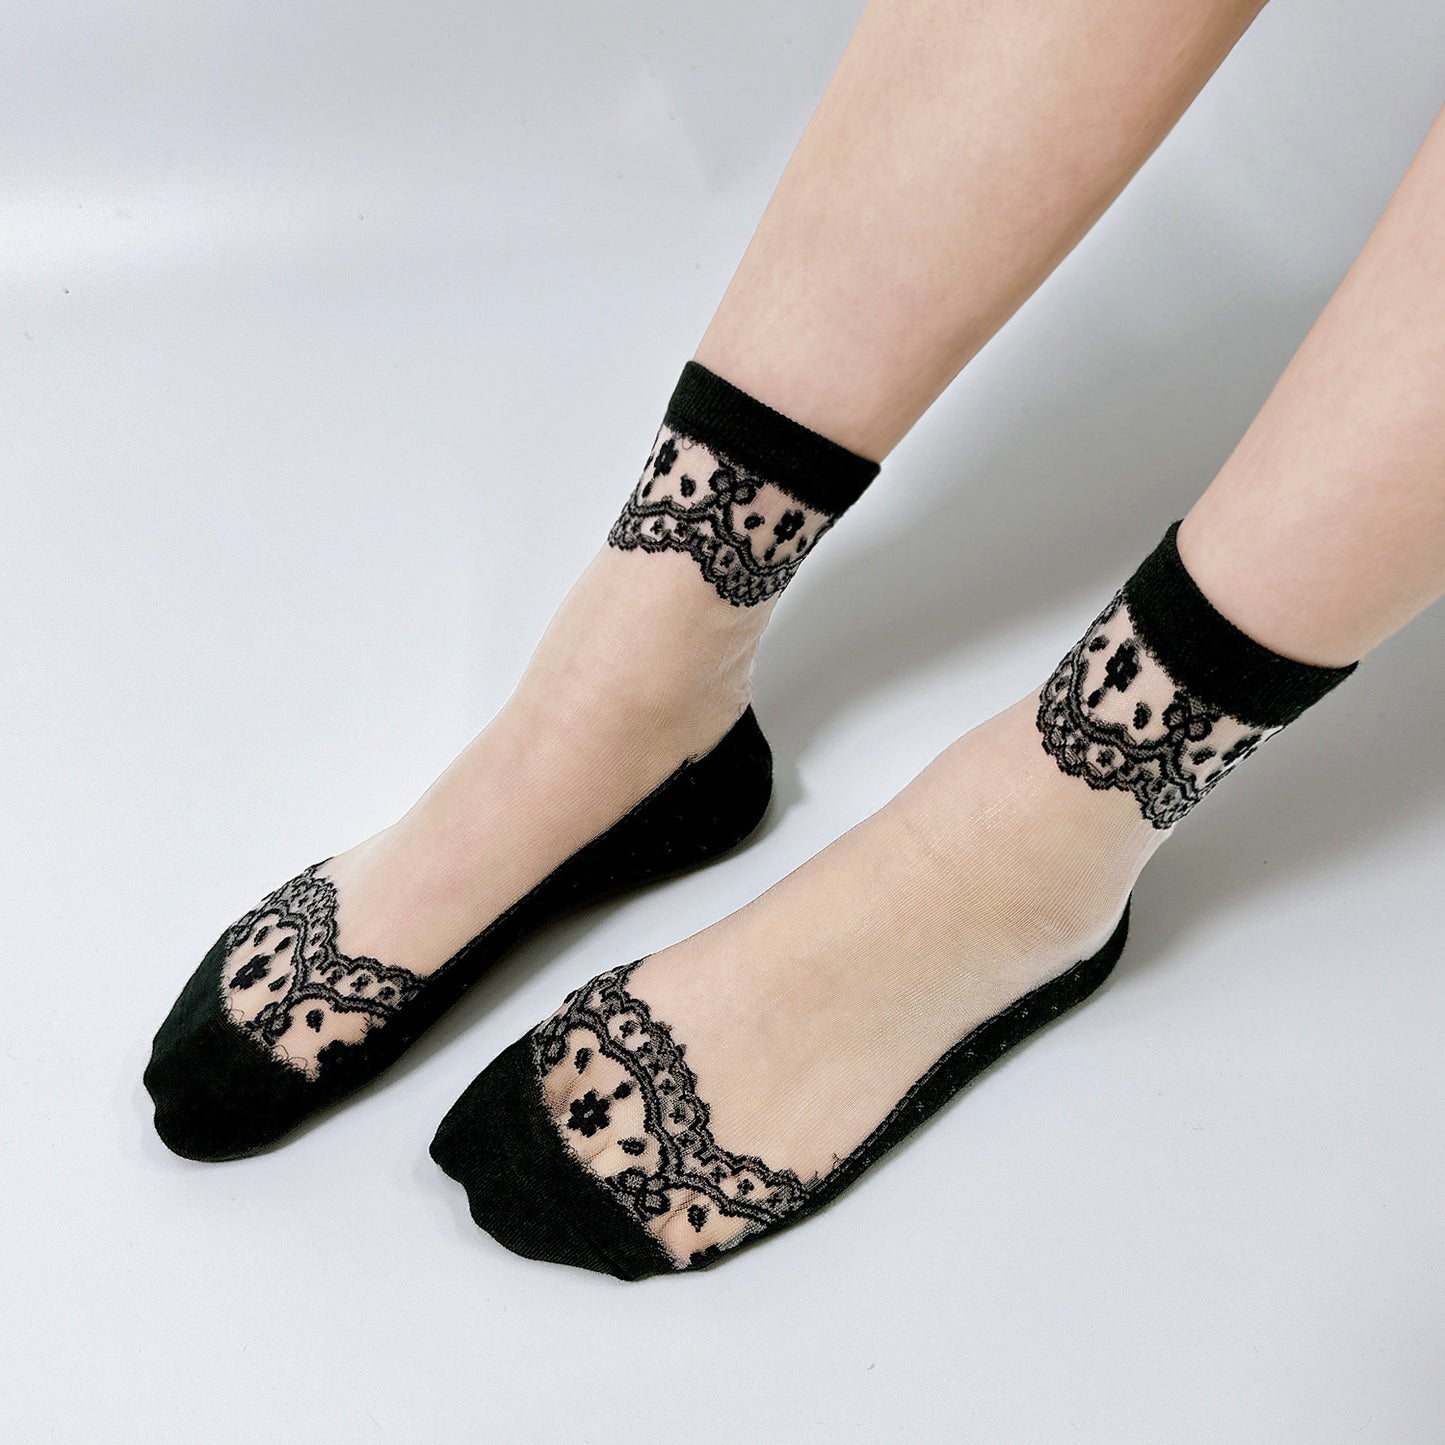 Women's Ankle Antique See-Through Socks